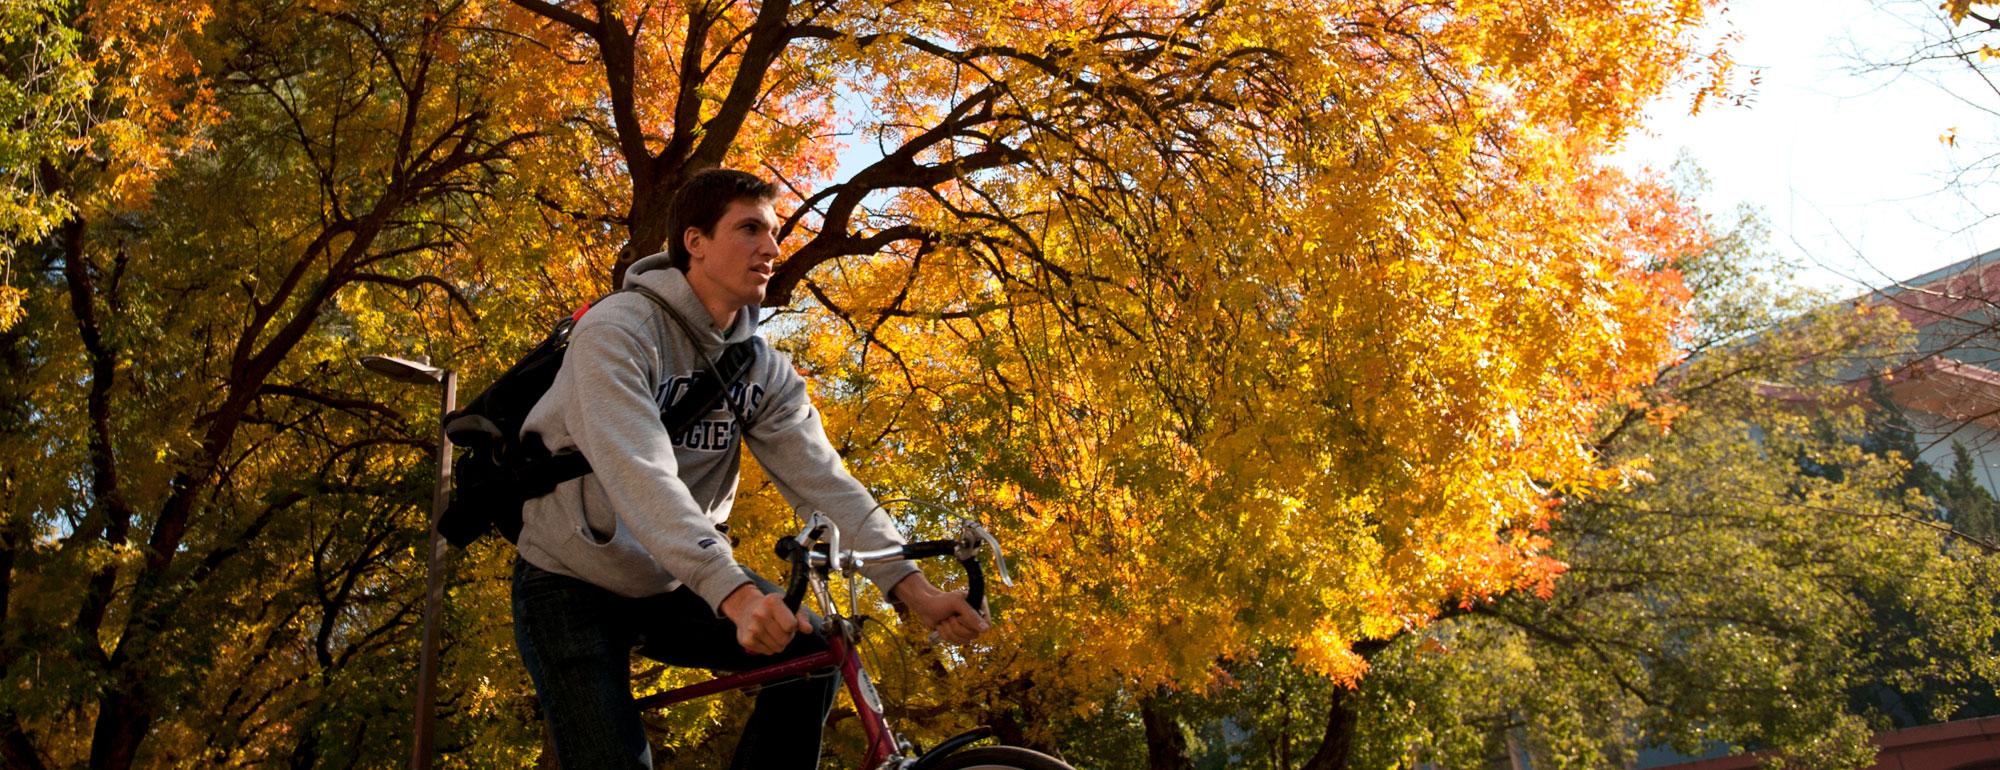 A male student rides his bicycle under the Fall foliage on the 春色视频 campus